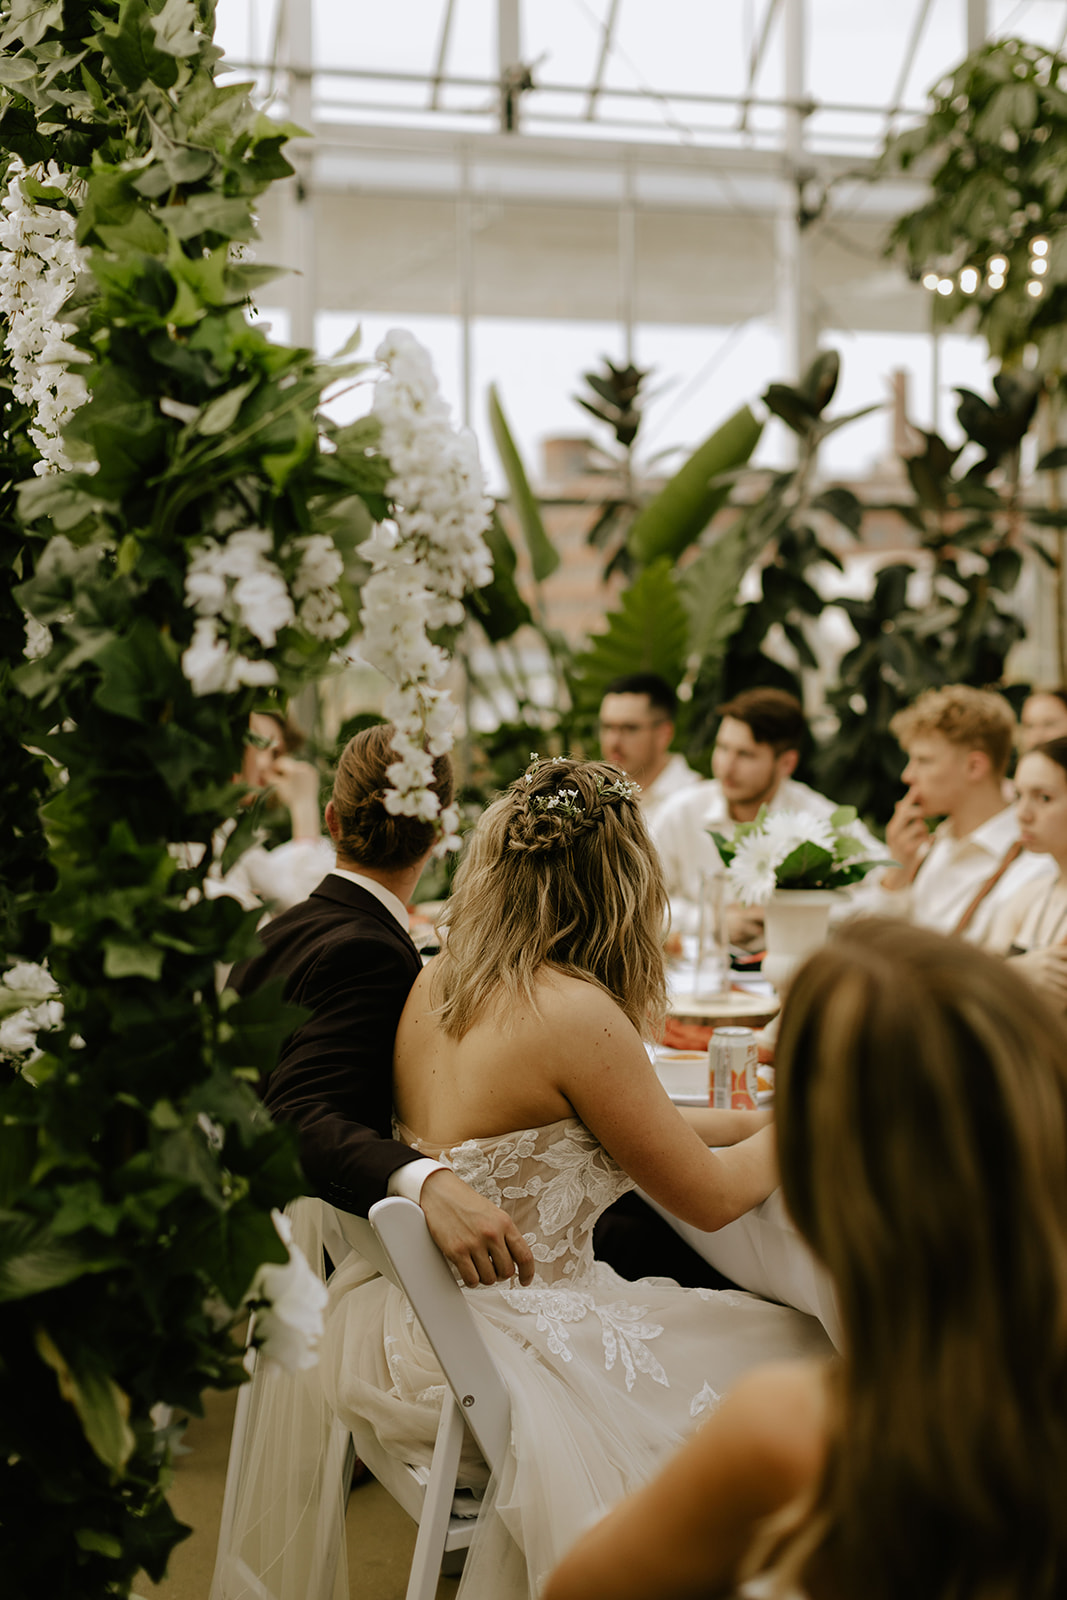 A wedding reception at the Downtown Market in Grand Rapids, Michigan